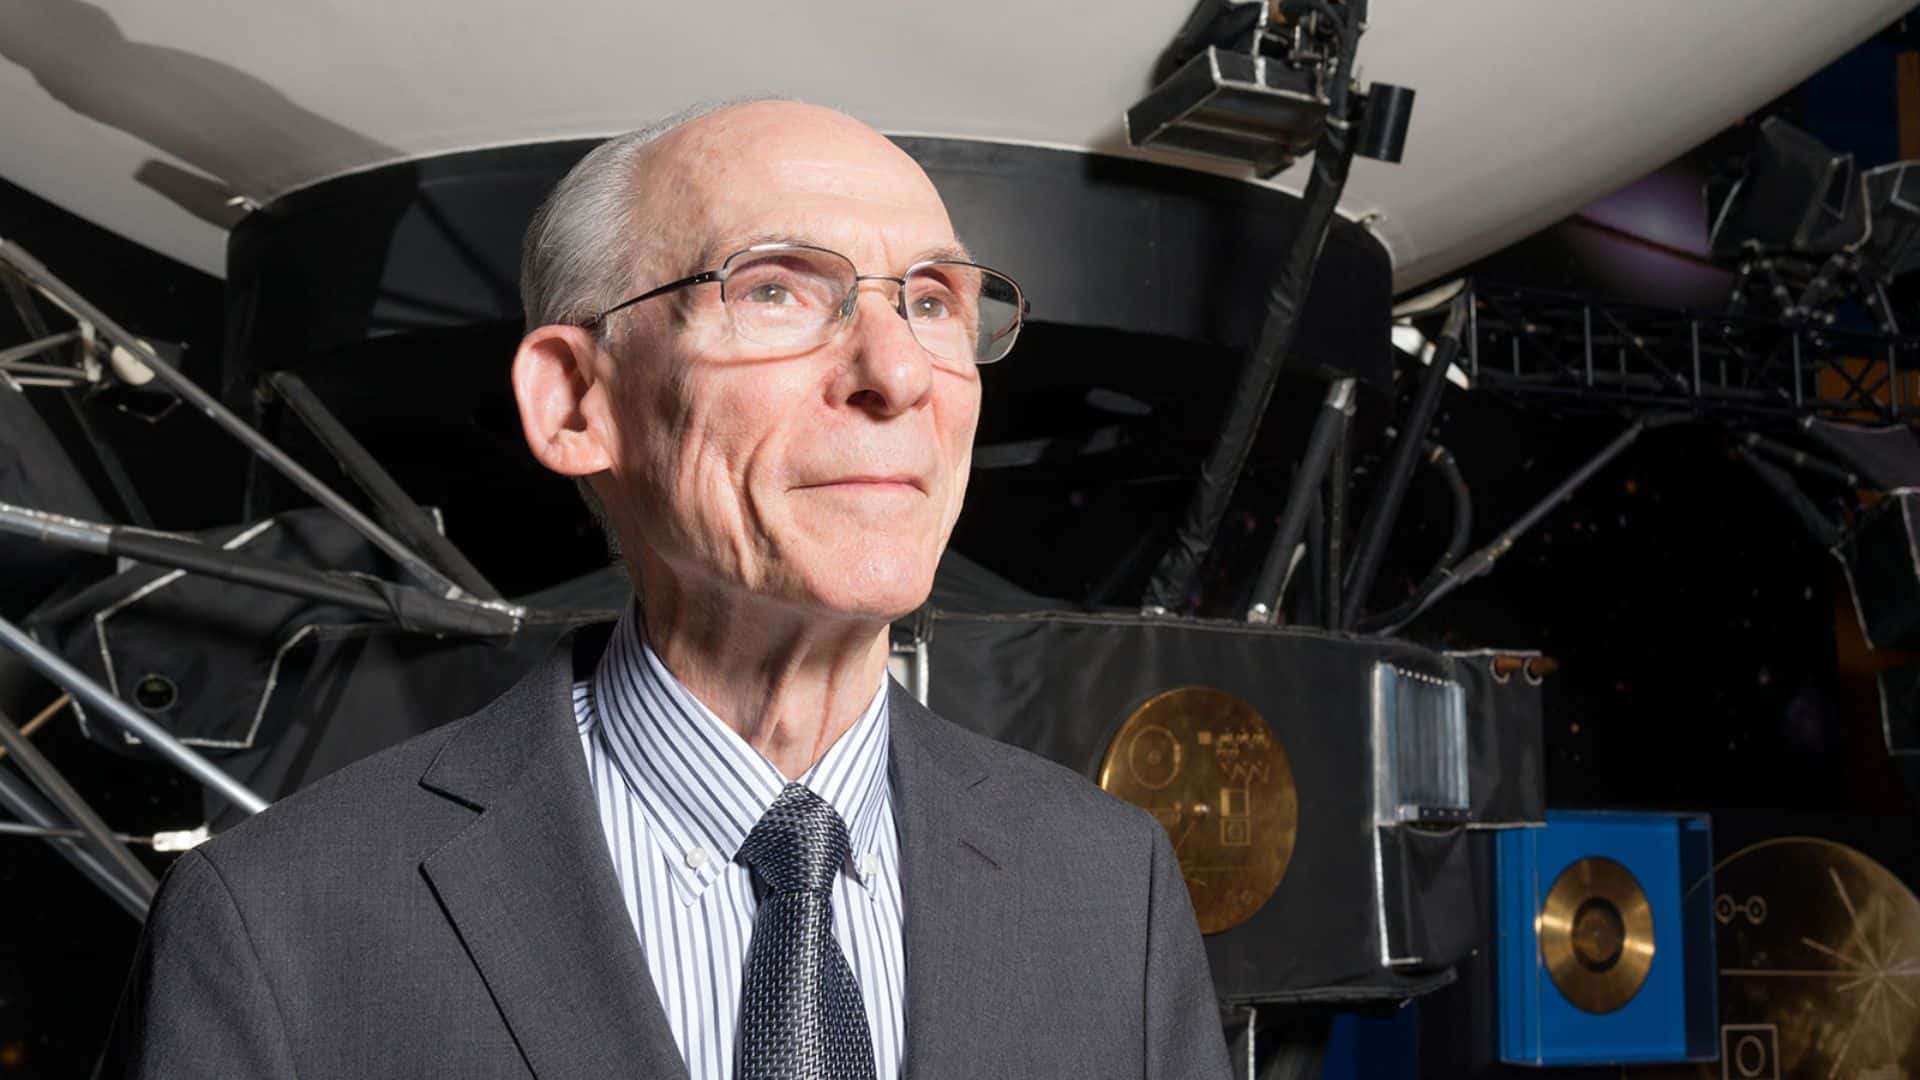 Ed Stone stands in front of a full-size model of the Voyager spacecraft at NASA's Jet Propulsion Laboratory (JPL) in 2019